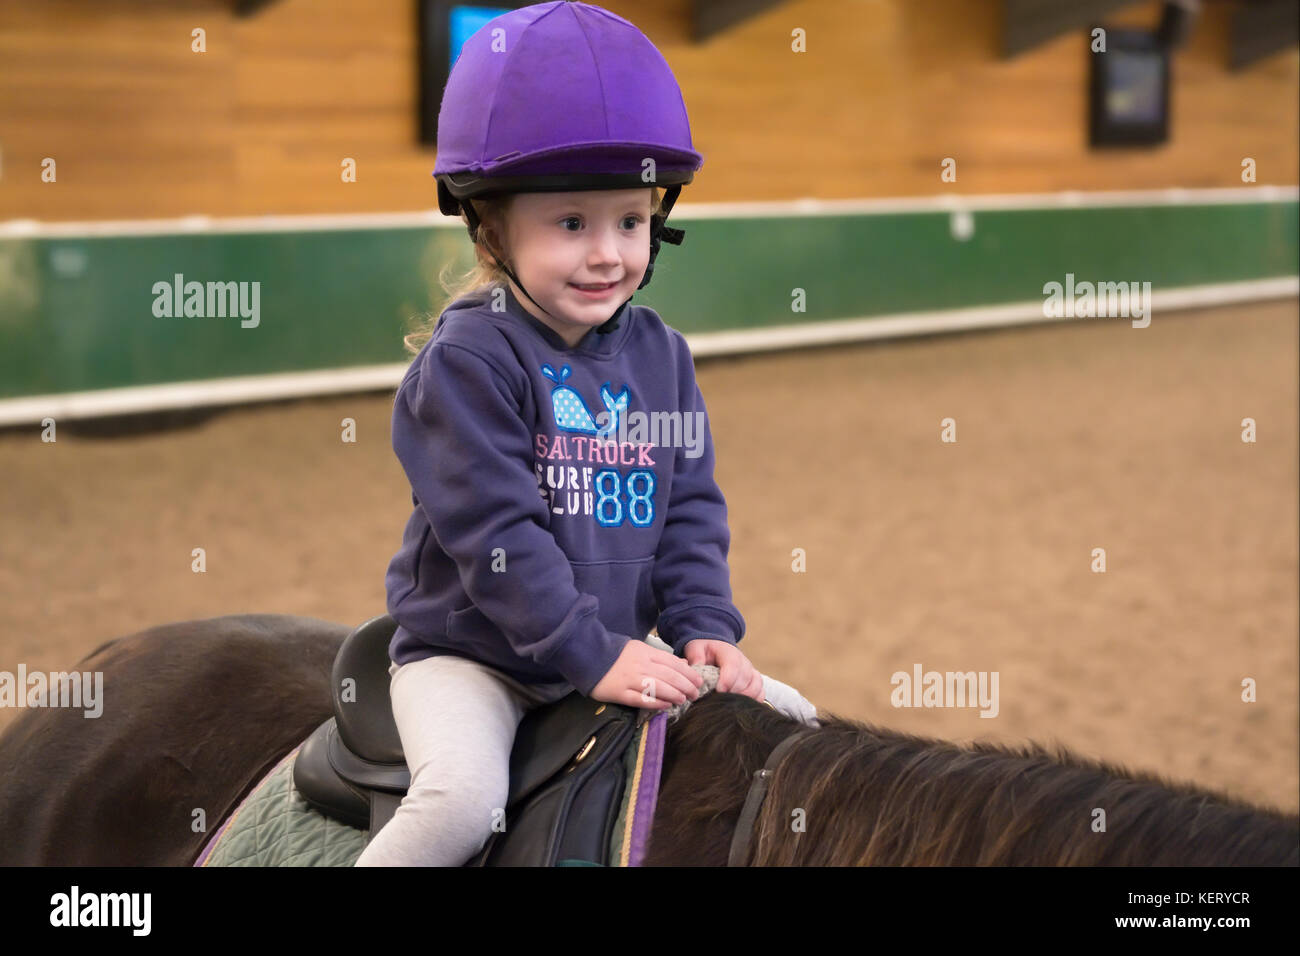 Young Child Horse Riding Lesson Instruction Wearing Purple Hat Helmet Stock Photo